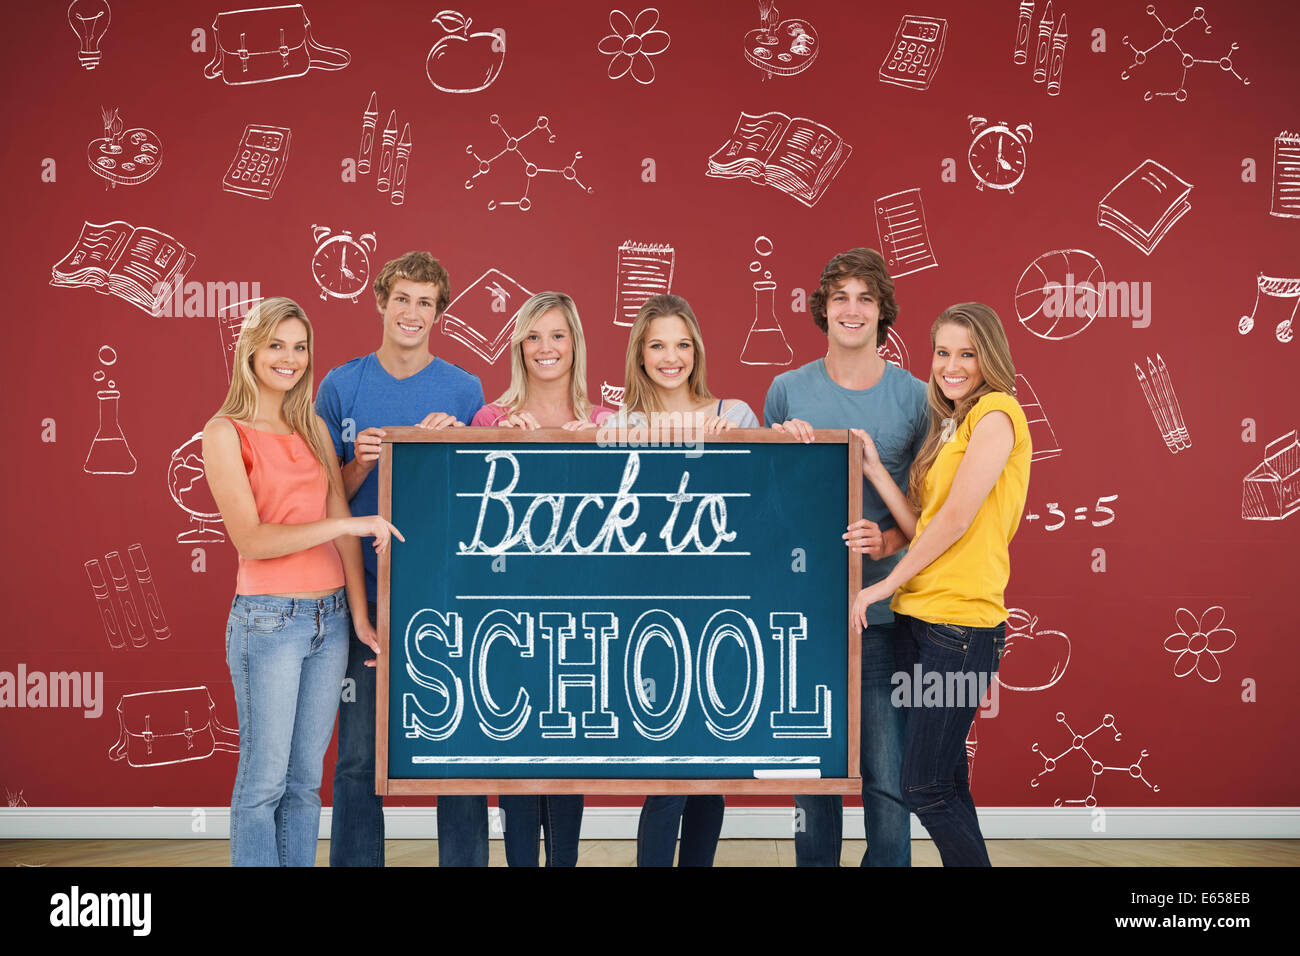 A group of people holding blackboard with message on wooden board Stock Photo